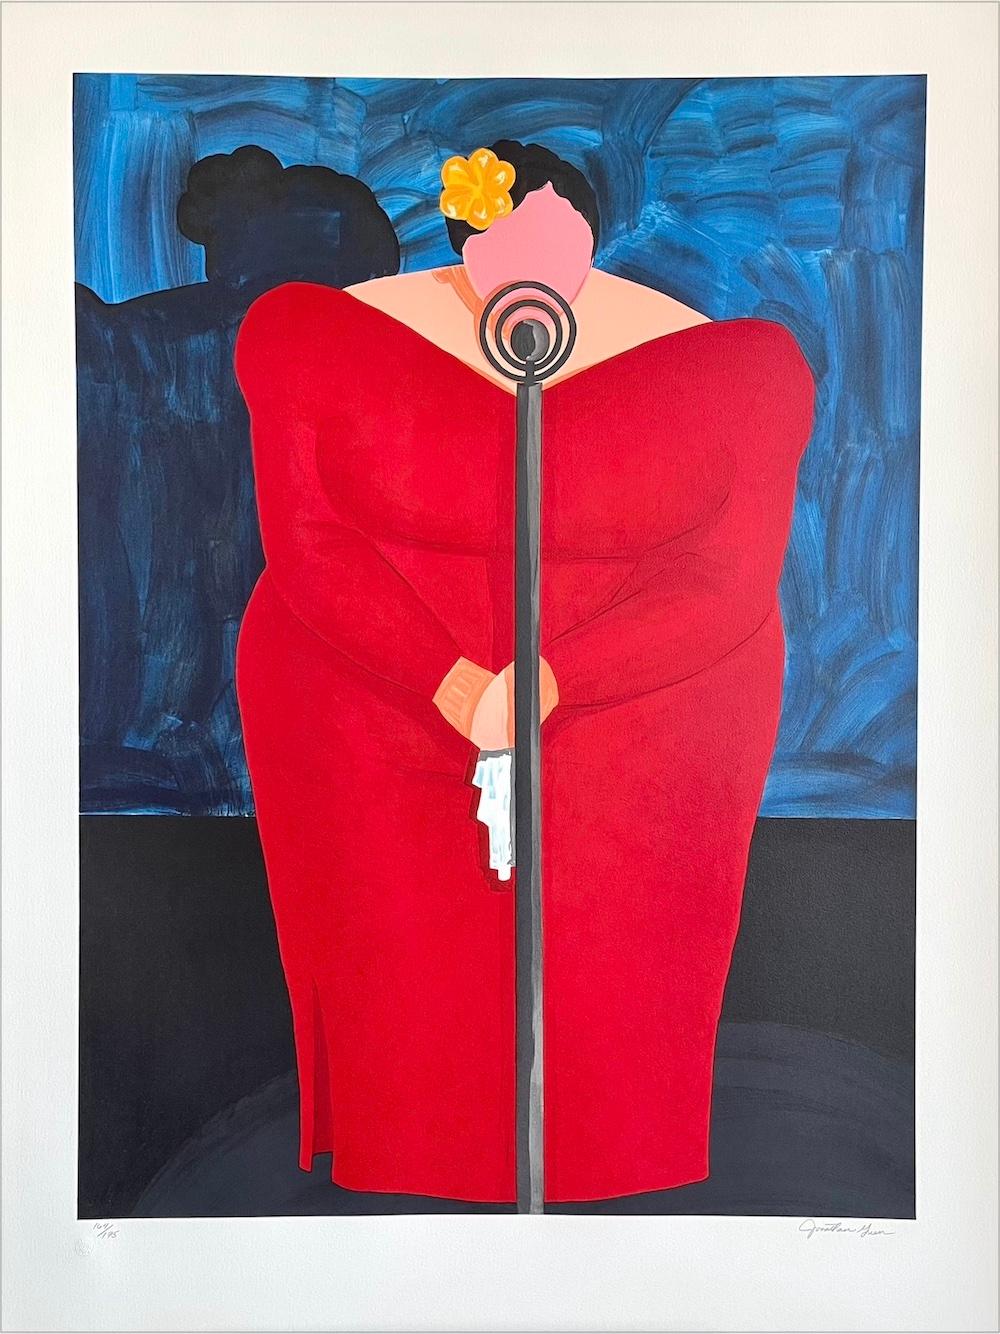 BESSIE MAE Signed Lithograph/Linocut, Plus Size Female Singer in Red Dress  - Print by Jonathan Green